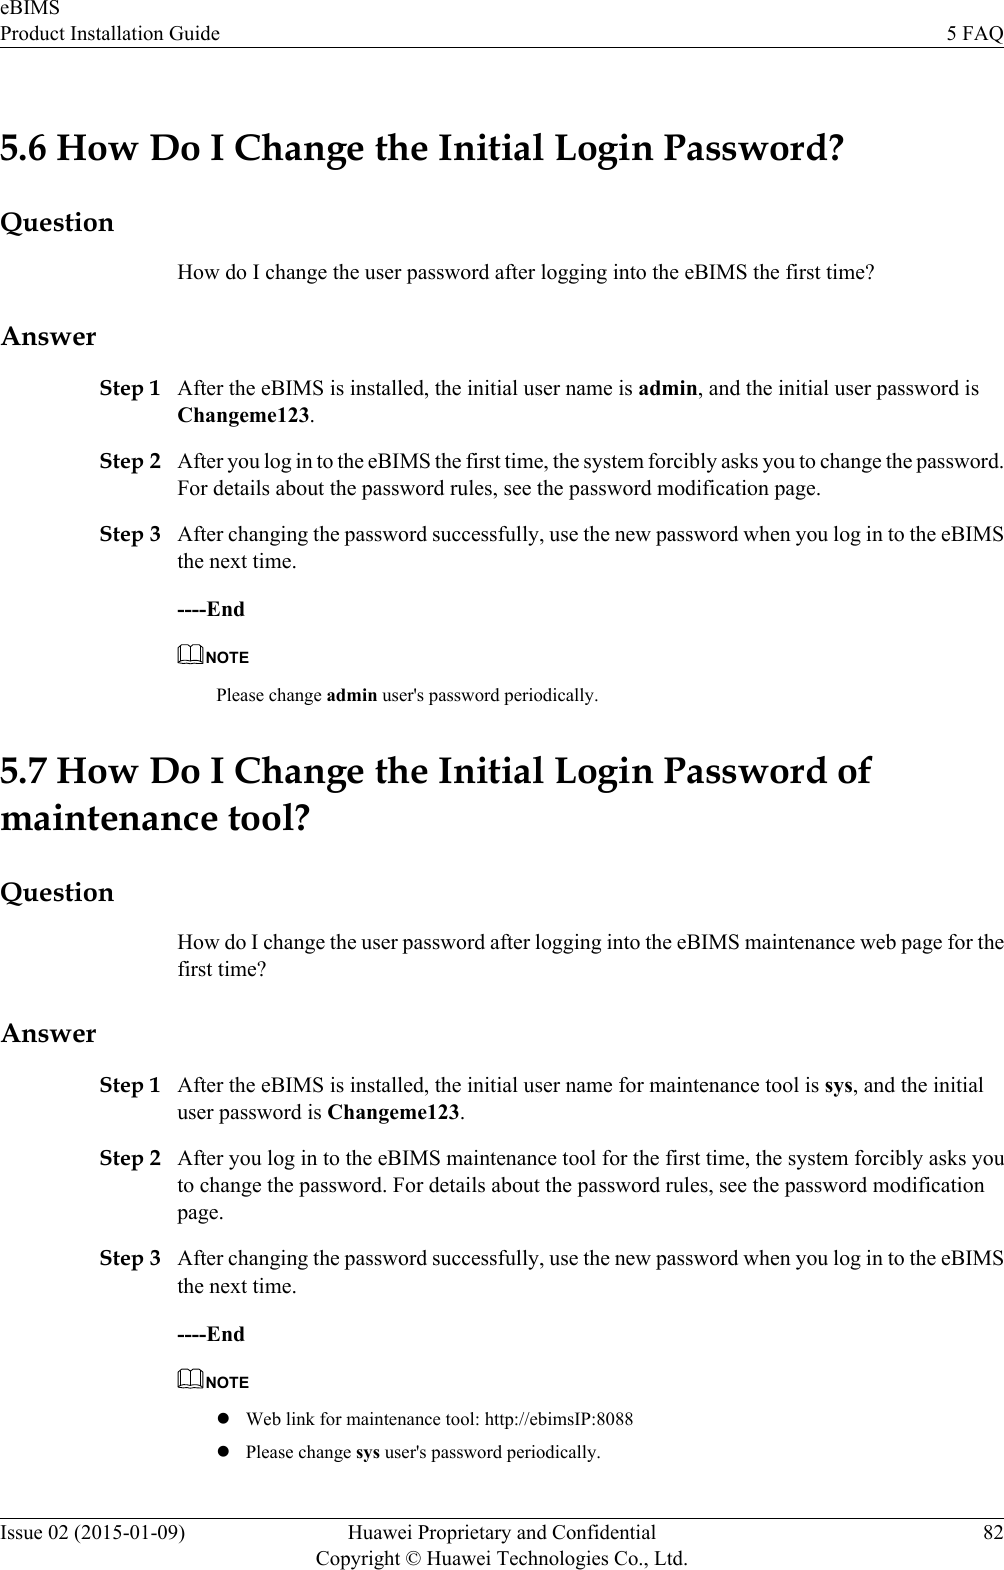 5.6 How Do I Change the Initial Login Password?QuestionHow do I change the user password after logging into the eBIMS the first time?AnswerStep 1 After the eBIMS is installed, the initial user name is admin, and the initial user password isChangeme123.Step 2 After you log in to the eBIMS the first time, the system forcibly asks you to change the password.For details about the password rules, see the password modification page.Step 3 After changing the password successfully, use the new password when you log in to the eBIMSthe next time.----EndNOTEPlease change admin user&apos;s password periodically.5.7 How Do I Change the Initial Login Password ofmaintenance tool?QuestionHow do I change the user password after logging into the eBIMS maintenance web page for thefirst time?AnswerStep 1 After the eBIMS is installed, the initial user name for maintenance tool is sys, and the initialuser password is Changeme123.Step 2 After you log in to the eBIMS maintenance tool for the first time, the system forcibly asks youto change the password. For details about the password rules, see the password modificationpage.Step 3 After changing the password successfully, use the new password when you log in to the eBIMSthe next time.----EndNOTElWeb link for maintenance tool: http://ebimsIP:8088lPlease change sys user&apos;s password periodically.eBIMSProduct Installation Guide 5 FAQIssue 02 (2015-01-09) Huawei Proprietary and ConfidentialCopyright © Huawei Technologies Co., Ltd.82